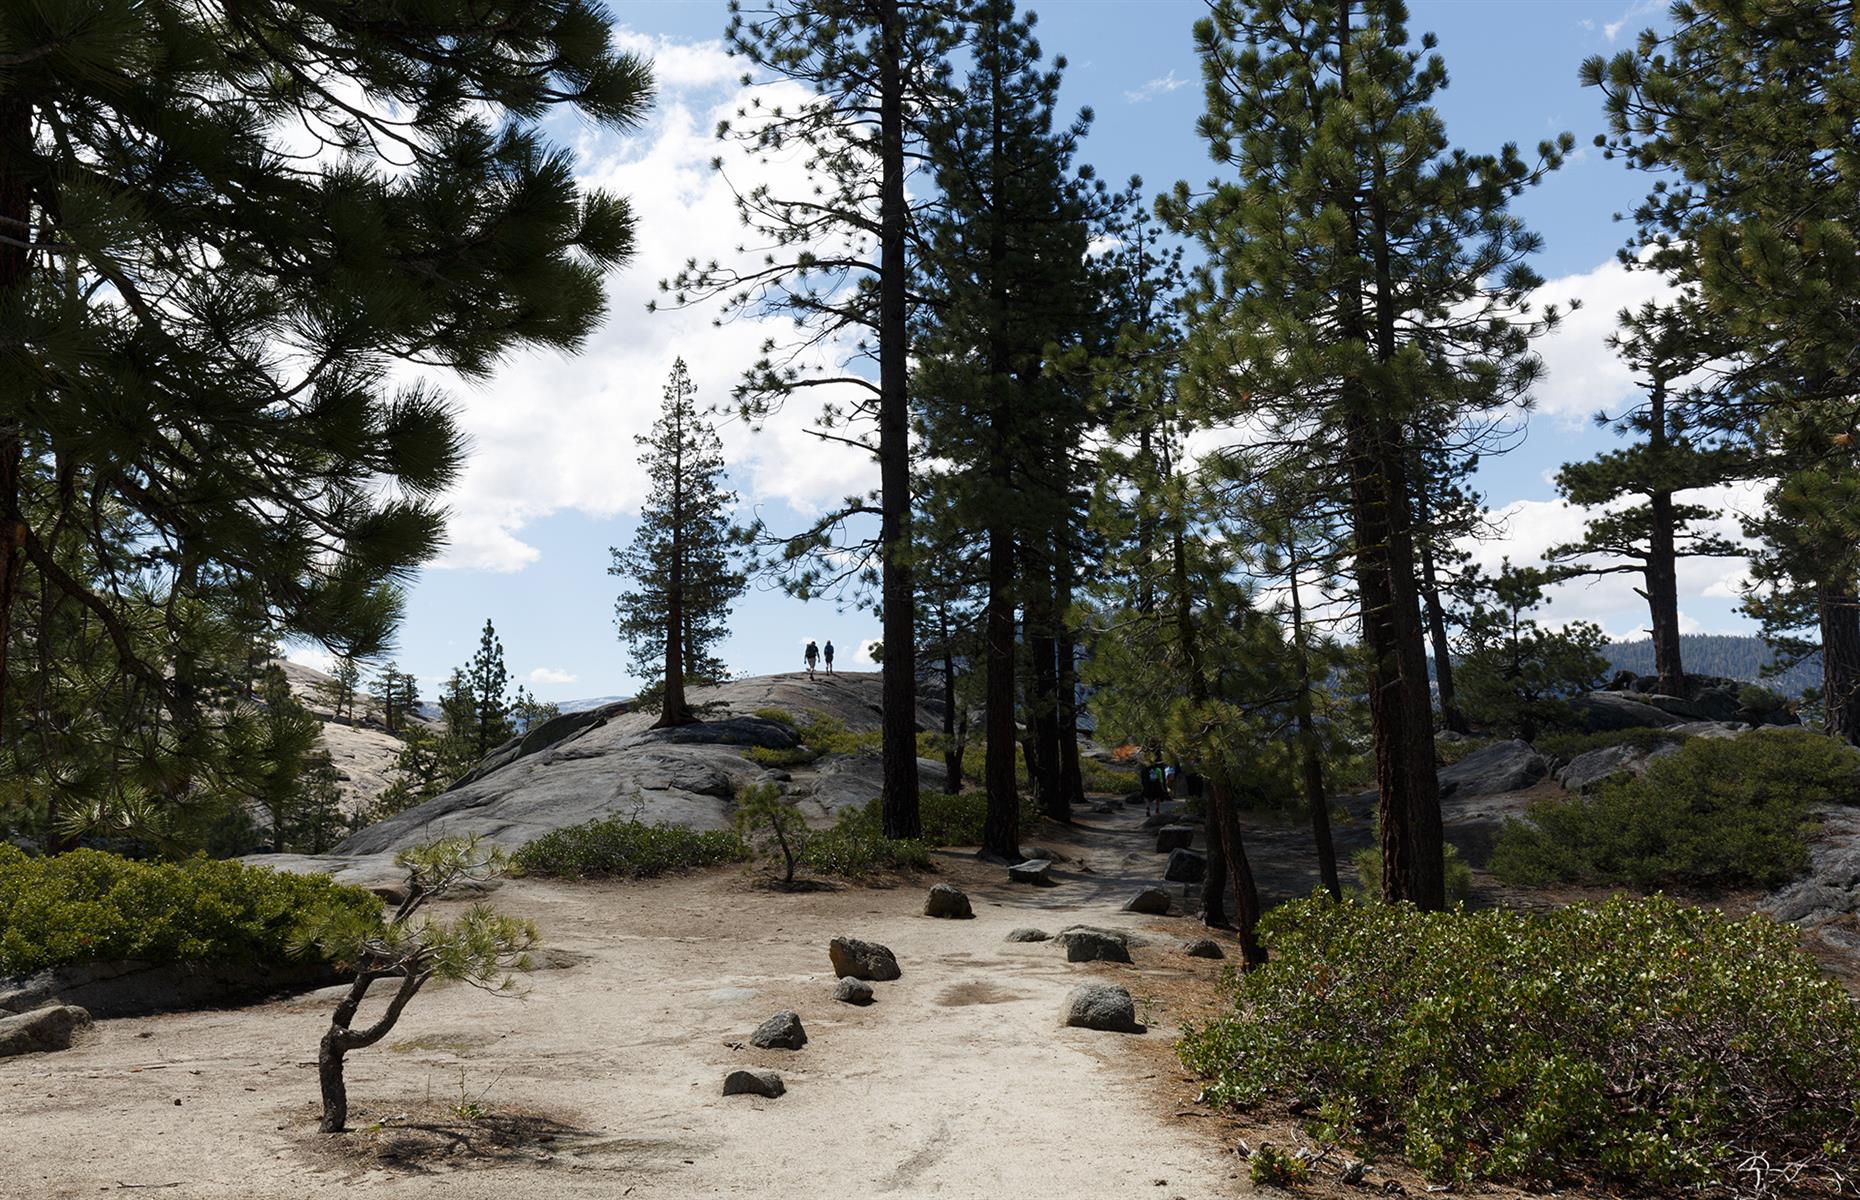 <p>The Golden State has little shortage of RV parks, and this one is nestled amid the pines and peaks of Yosemite. It's back to basics at <a href="https://www.recreation.gov/camping/campgrounds/232447">Upper Pines</a> – there are non-electric RV lots, toilets, drinking water and food storage facilities only. It's also near to the start of the Mirror Lake Trail, whose two-mile (3.2km) path winds towards (you guessed it) gleaming Mirror Lake. A day-use reservation is currently needed to enter Yosemite National Park, but those staying overnight are exempt – just make sure you have your camping/lodging reservation to hand at the entrance.</p>